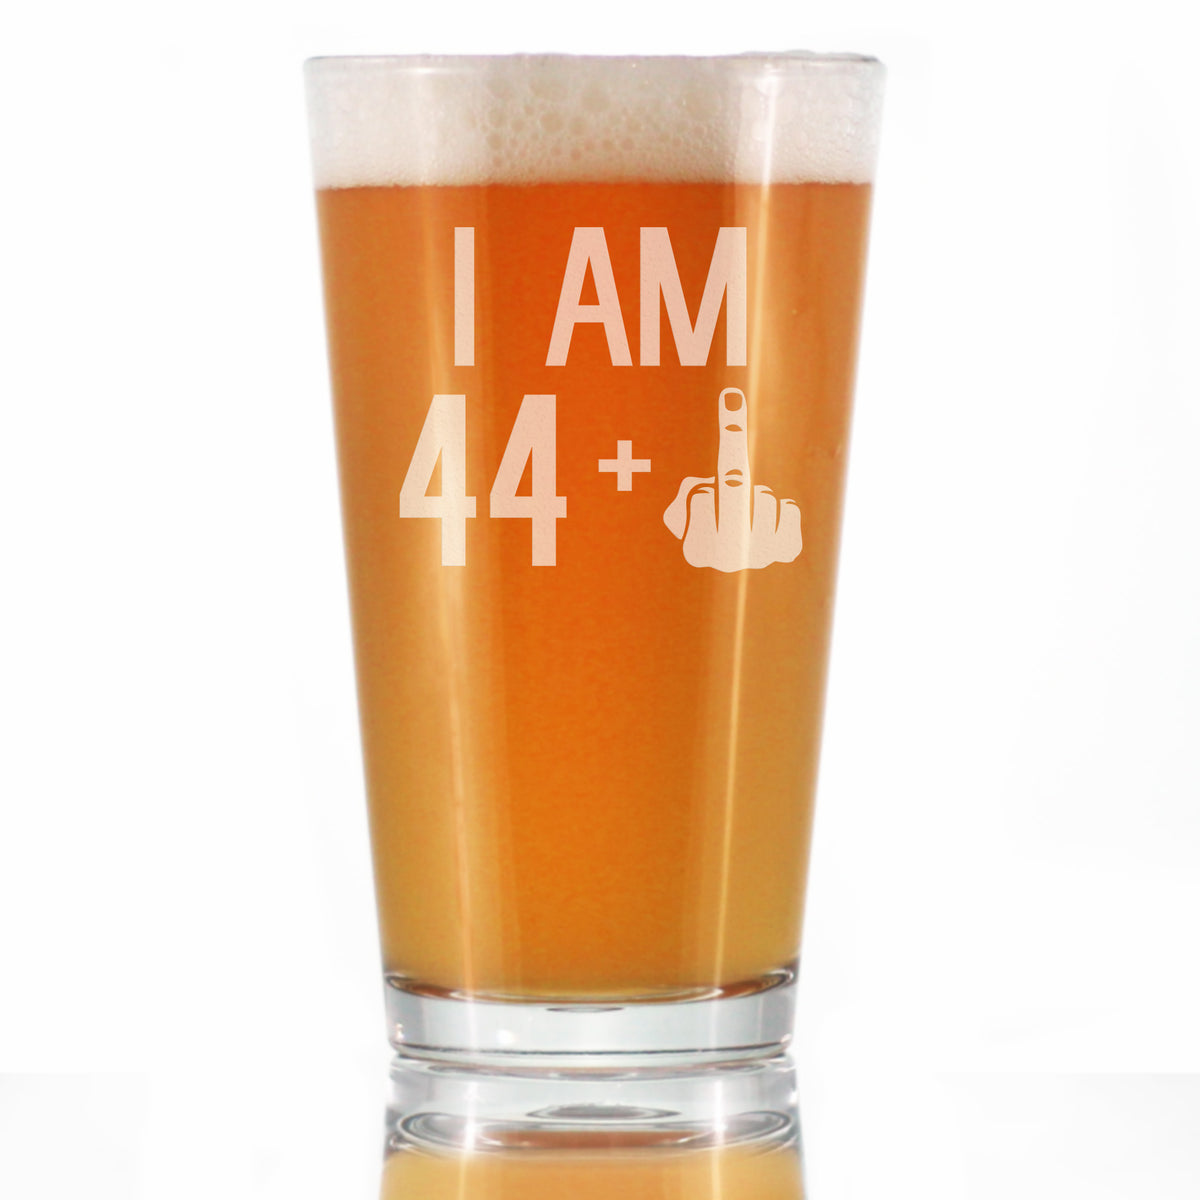 44 + 1 Middle Finger - 16 oz Pint Glass for Beer - Funny 45th Birthday Gifts for Men and Women Turning 45